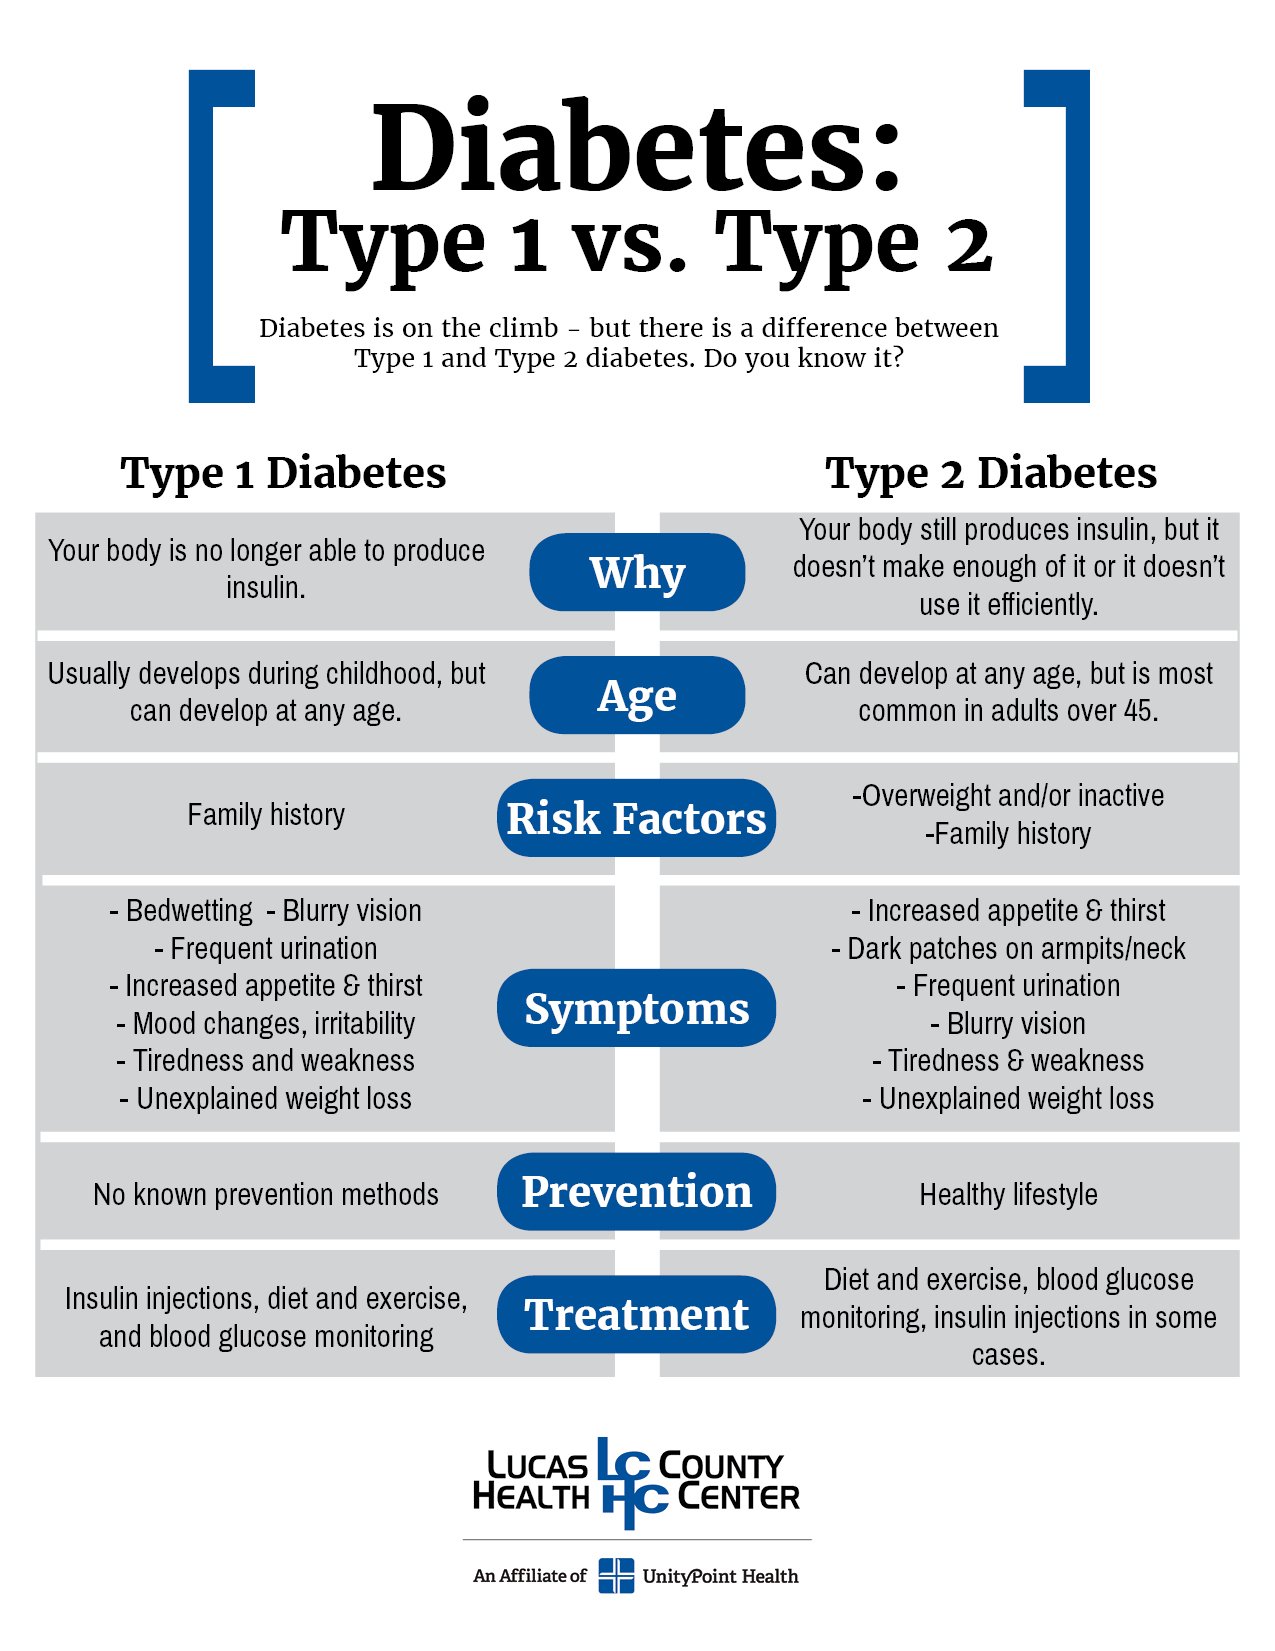 LCHC on Twitter: " Do you know the difference between Type 1 and Type 2 ...